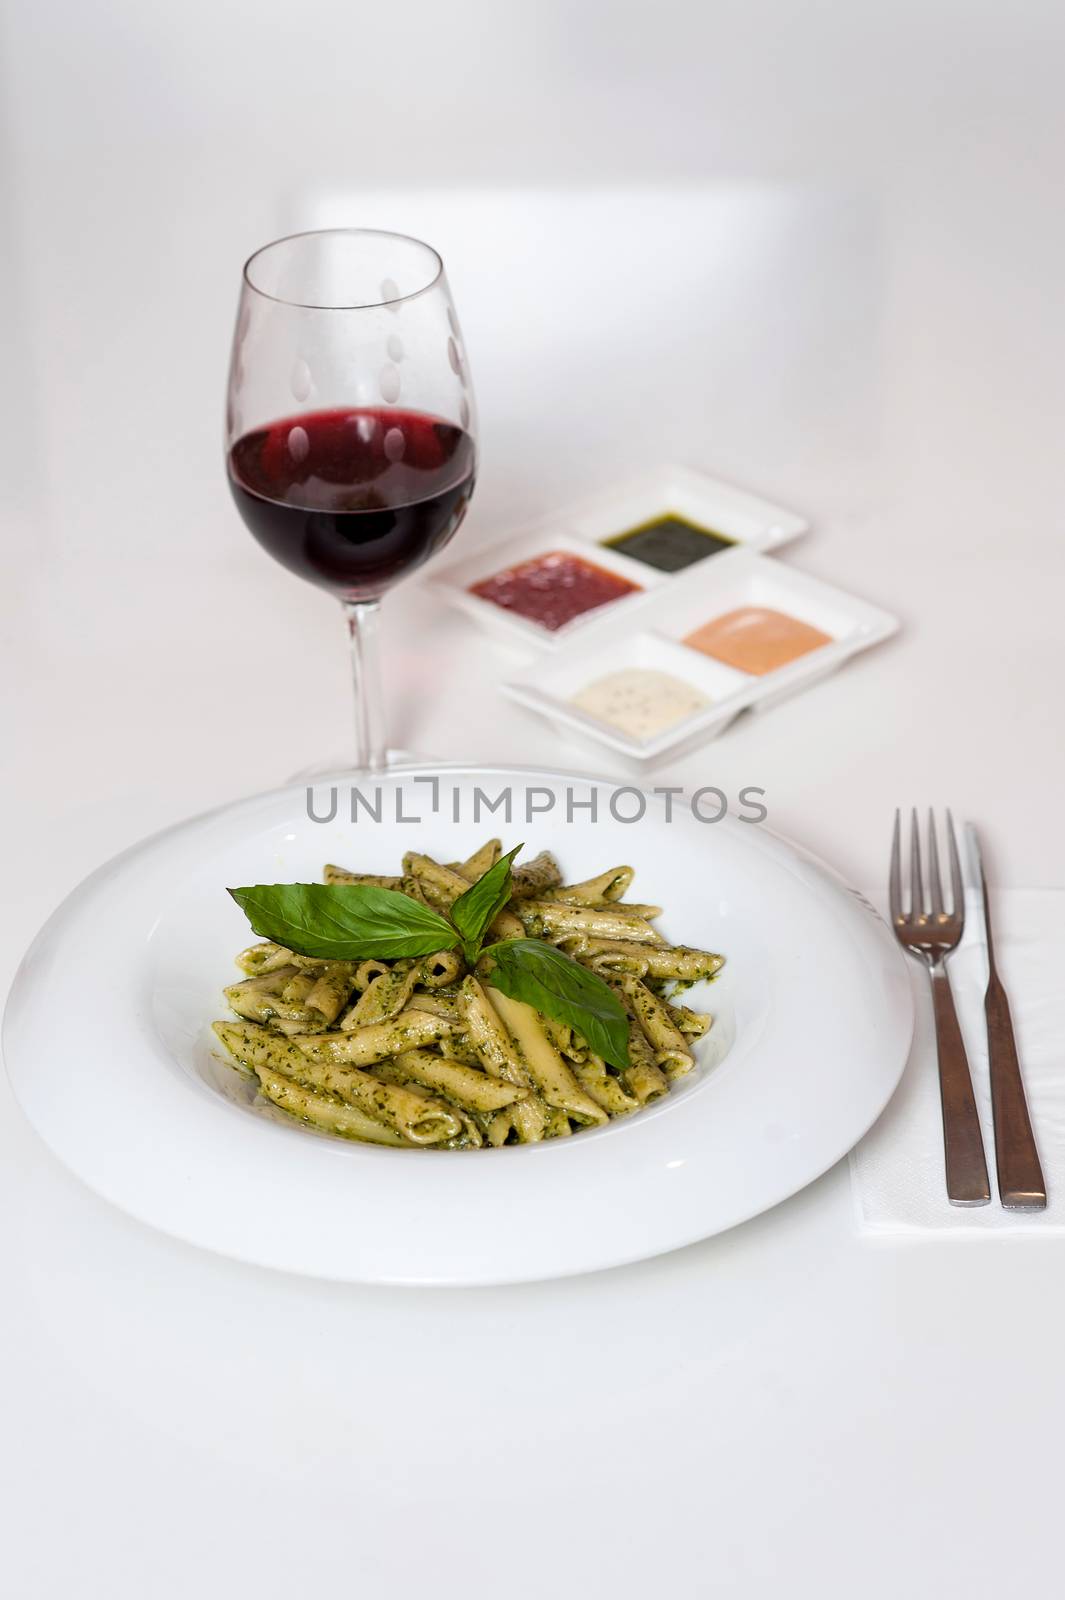 Yummy pasta served with red wine by stockyimages